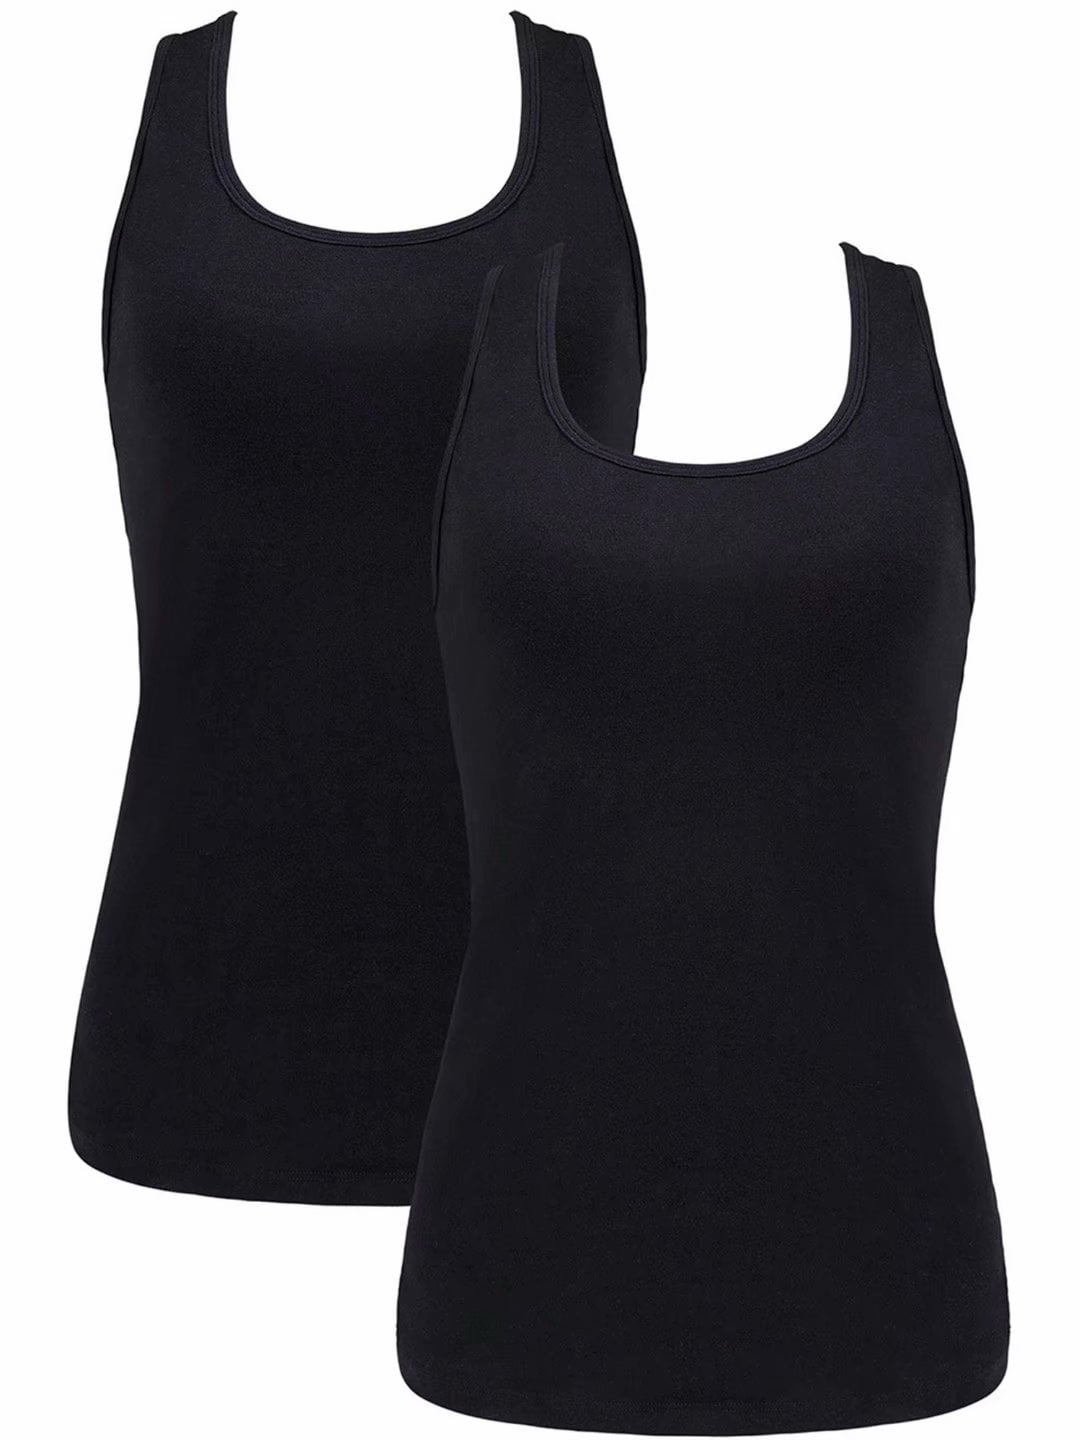 ROSYLINE Basic Tank Tops for Women Undershirts Tank Tops with Scoop Neck cami Yoga Shirts 3-4 Pack